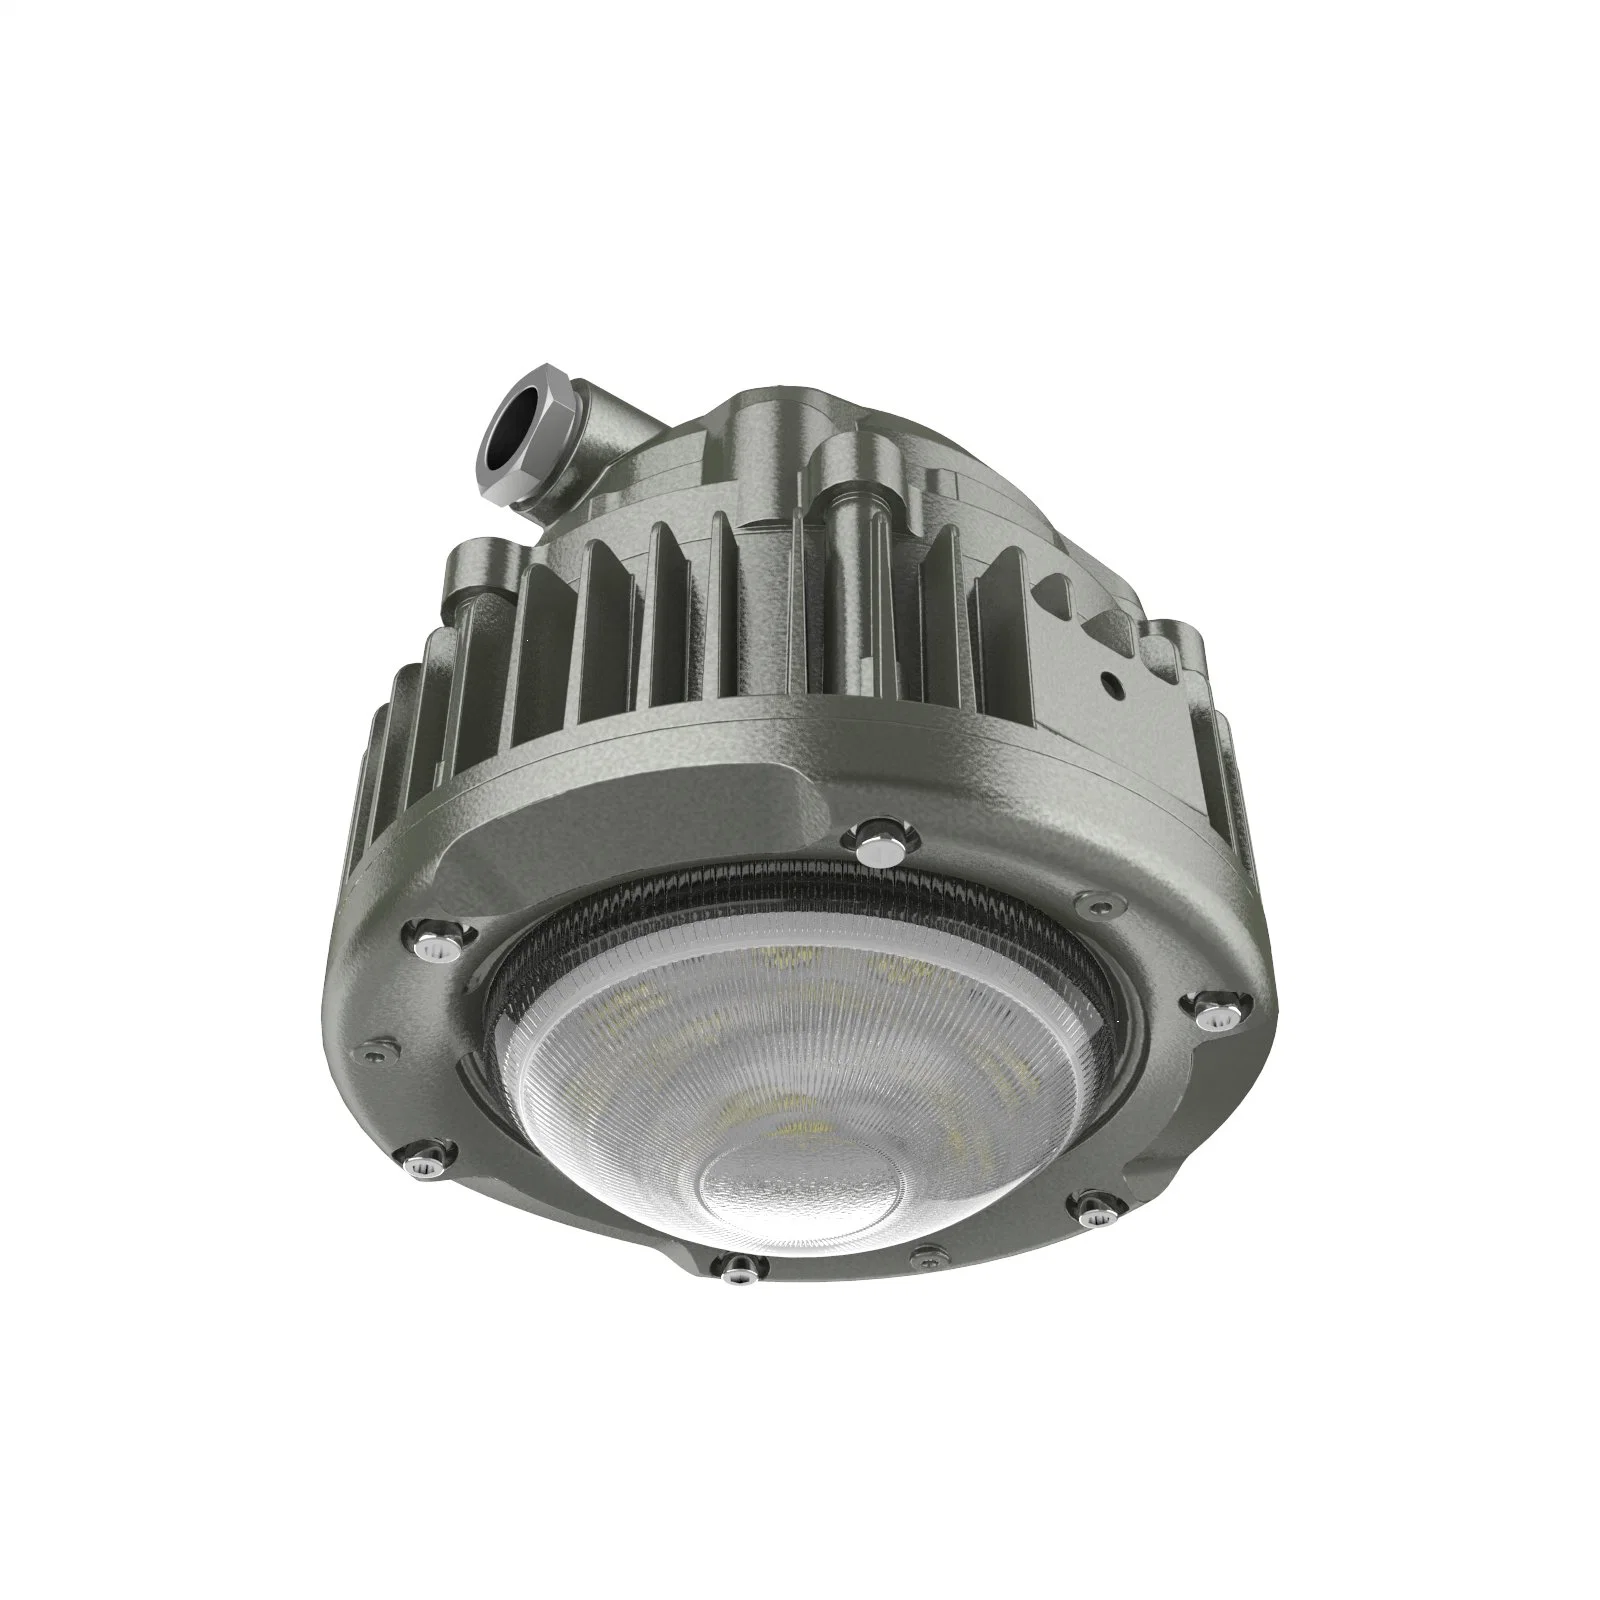 Hot Selling LED Explosion Proof Lighting Fixture ceiling Light Fixtures